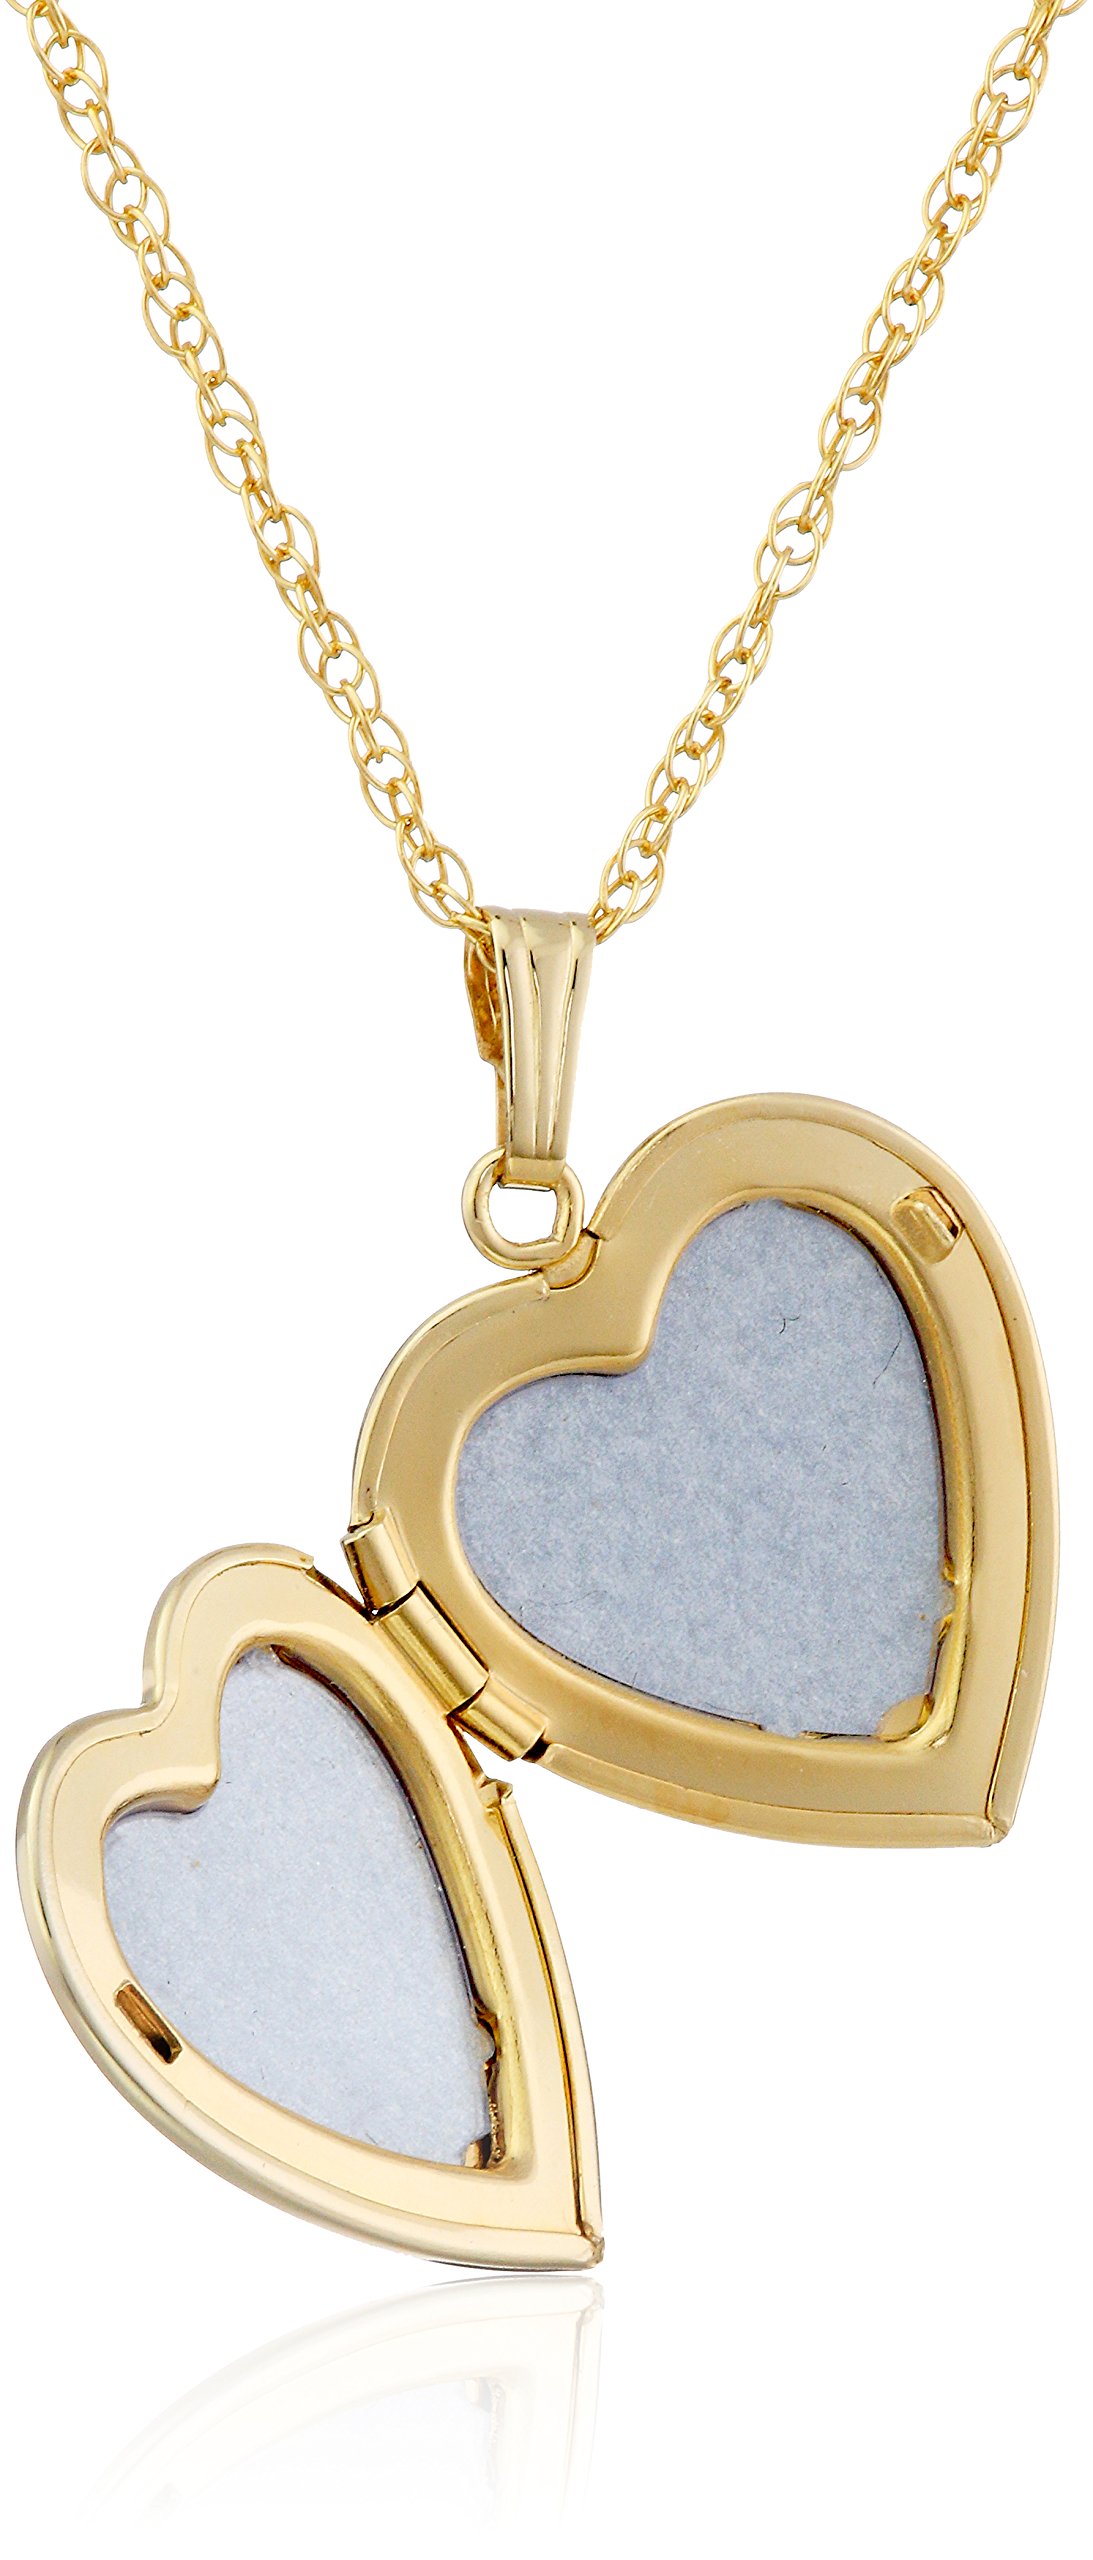 Amazon Collection 14k Engraved Flowers Heart Locket Necklace, 18